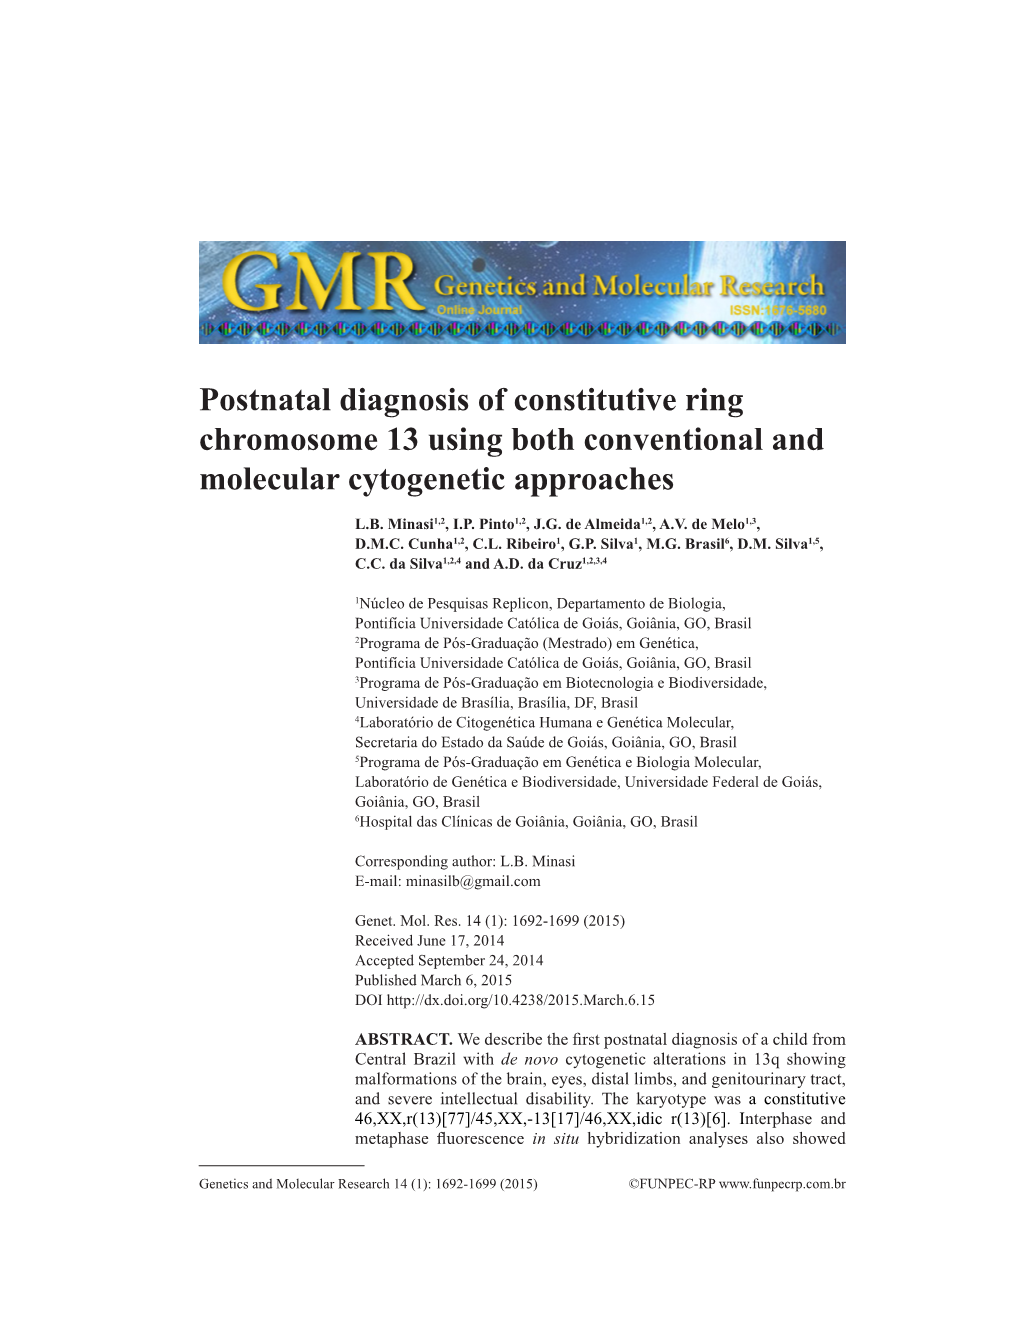 Postnatal Diagnosis of Constitutive Ring Chromosome 13 Using Both Conventional and Molecular Cytogenetic Approaches